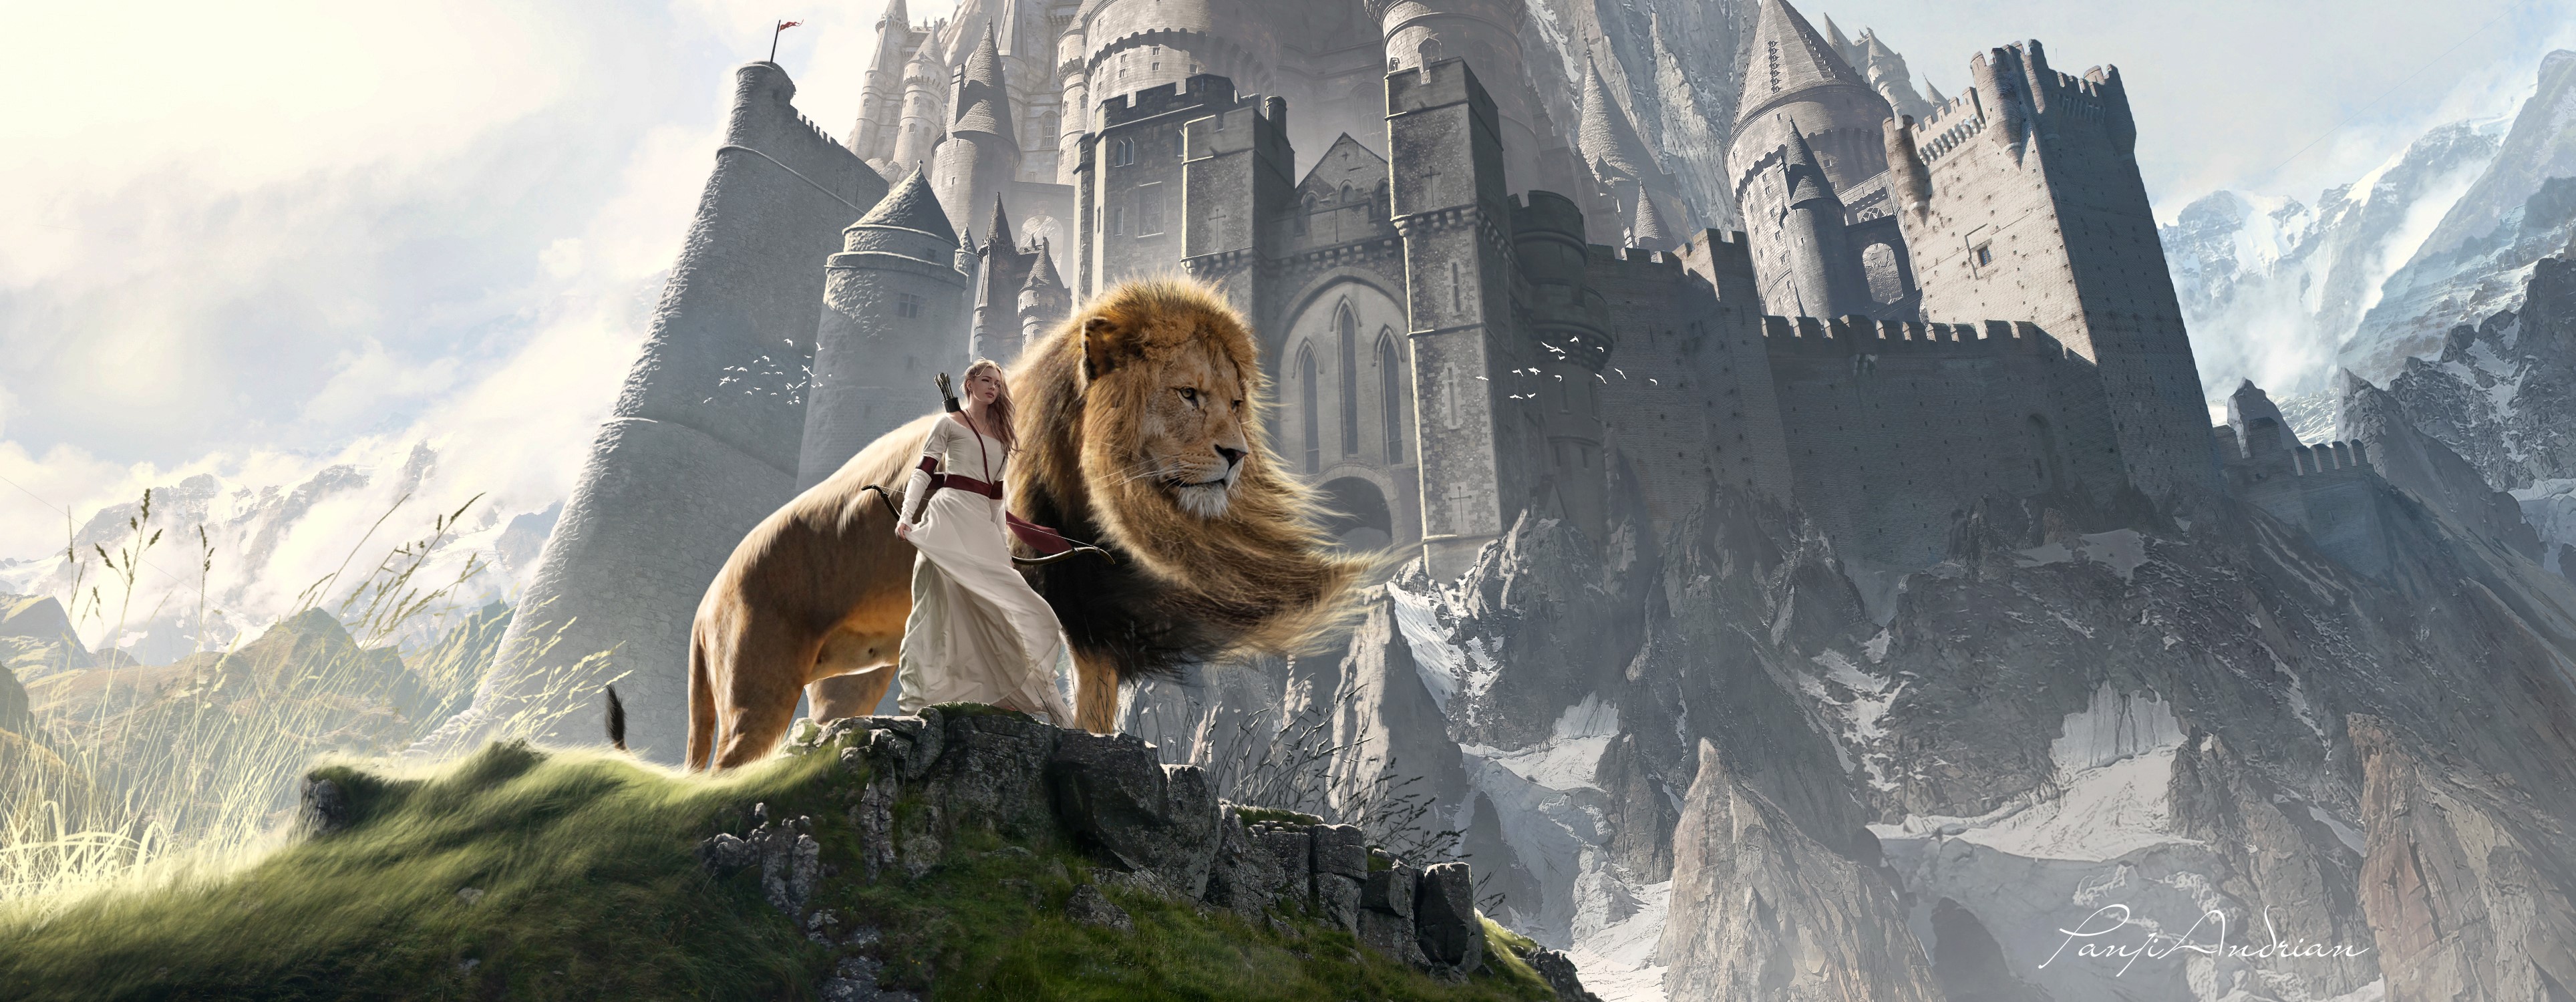 General 3856x1500 The Chronicles of Narnia animals lion movies fantasy castle women archer big cats artwork DeviantArt mountains